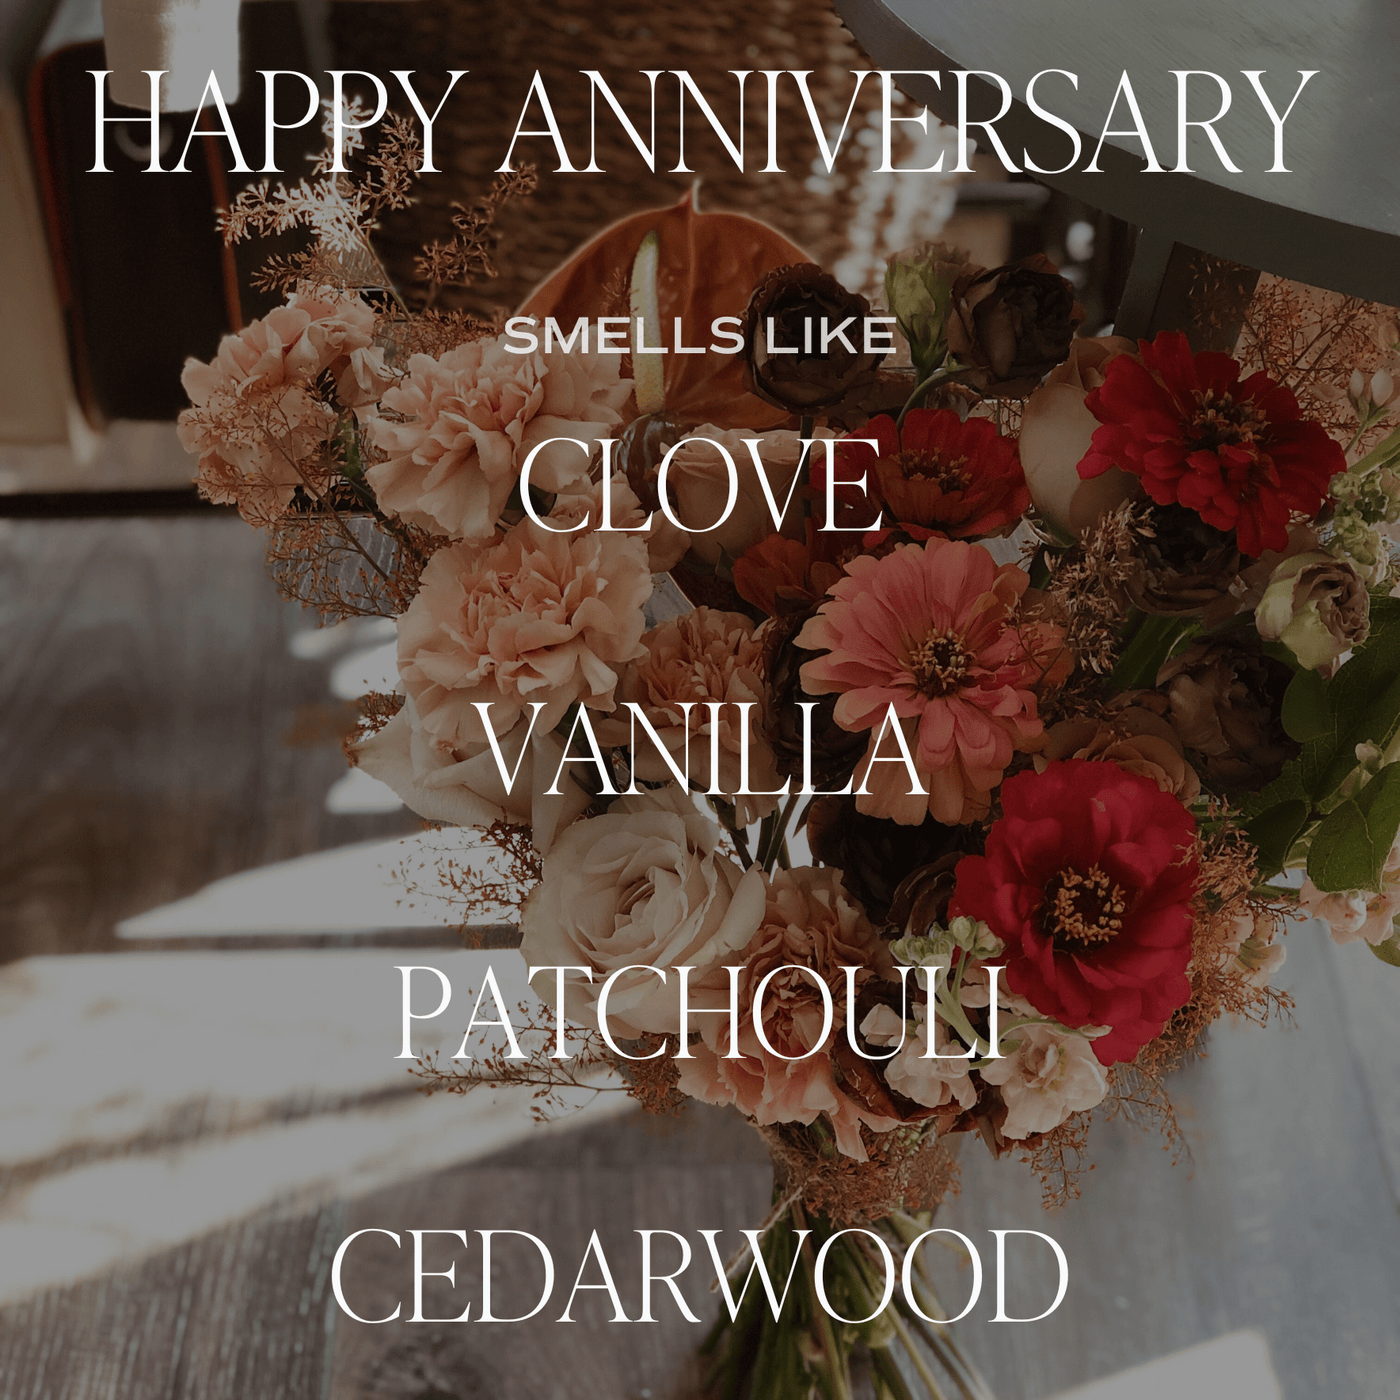 Happy Anniversary Soy Candle - Clear Jar - 9 oz (Palo Santo Patchouli) - Sweet Water Decor - Candles